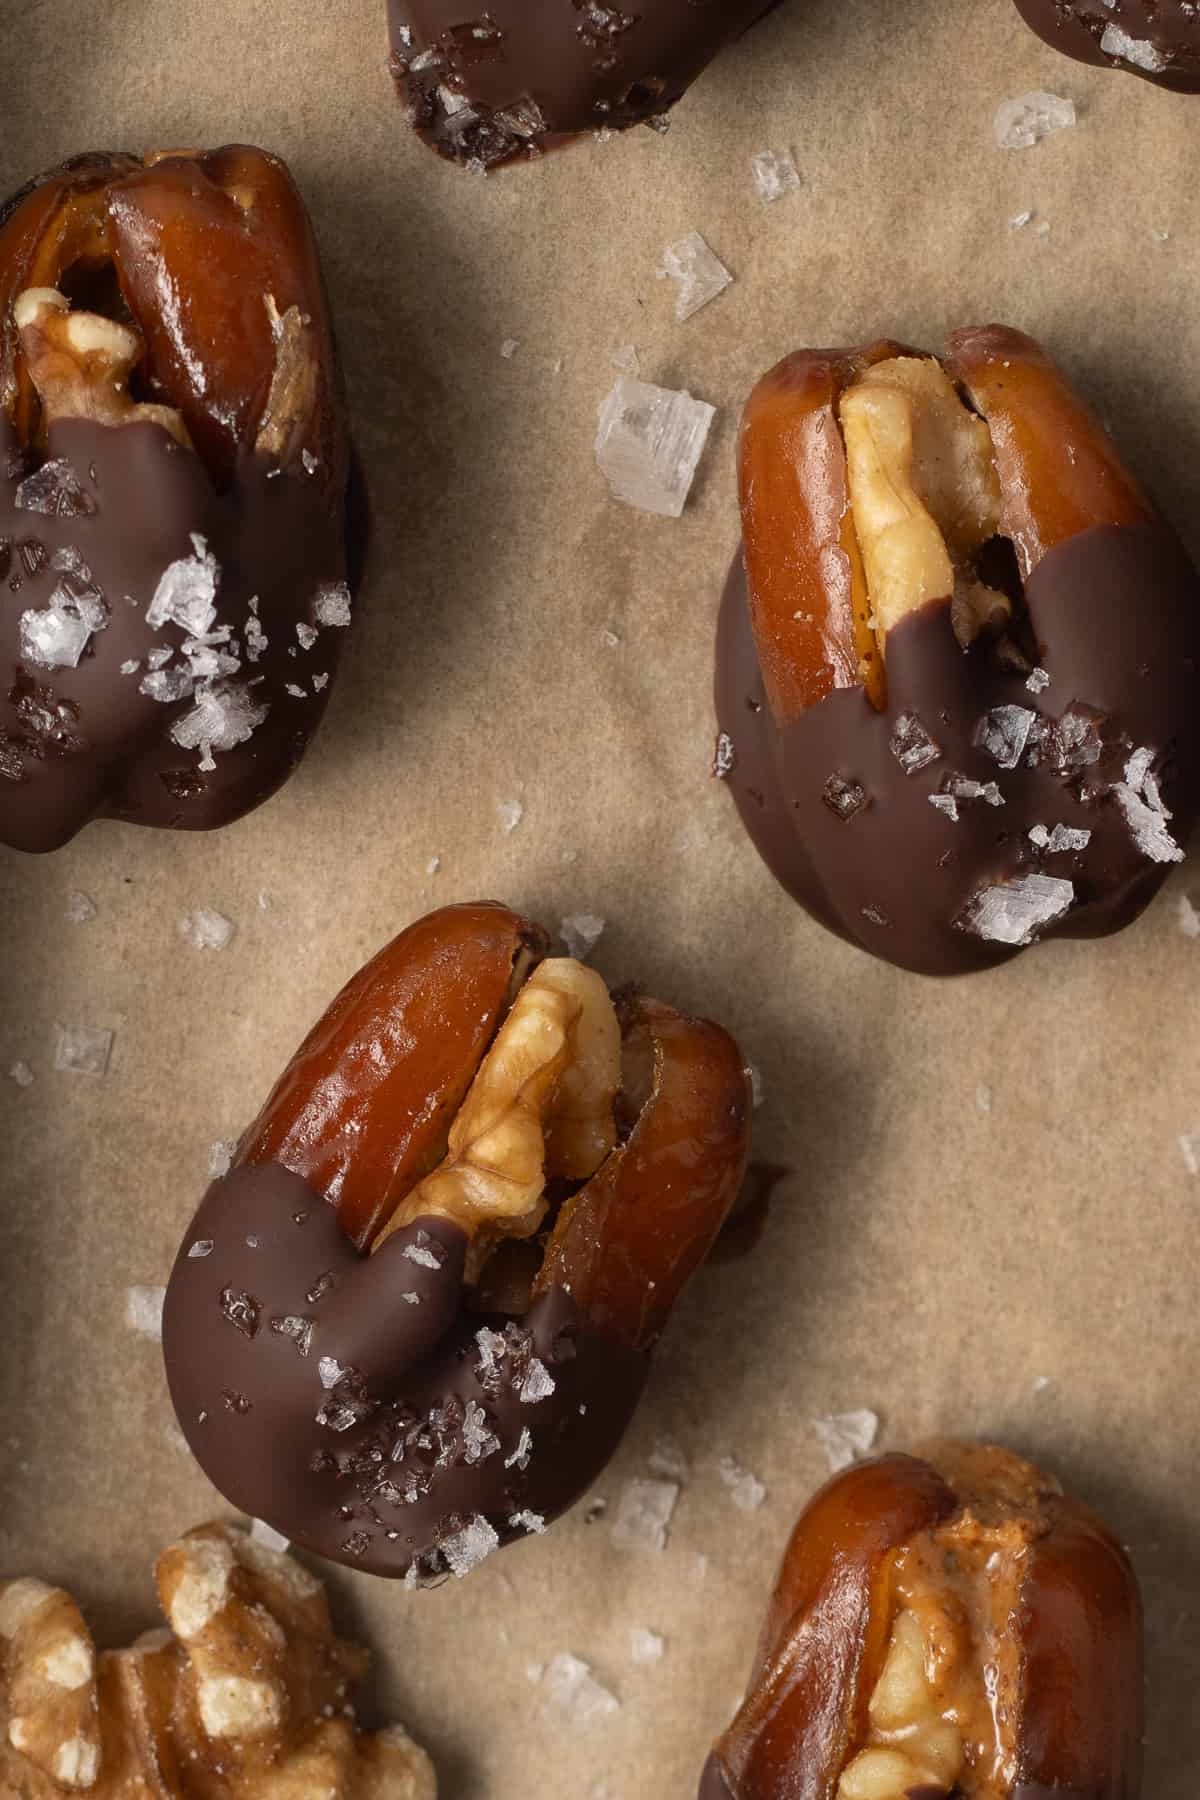 Chocolate dipped dates stuffed with walnuts on parchment paper.